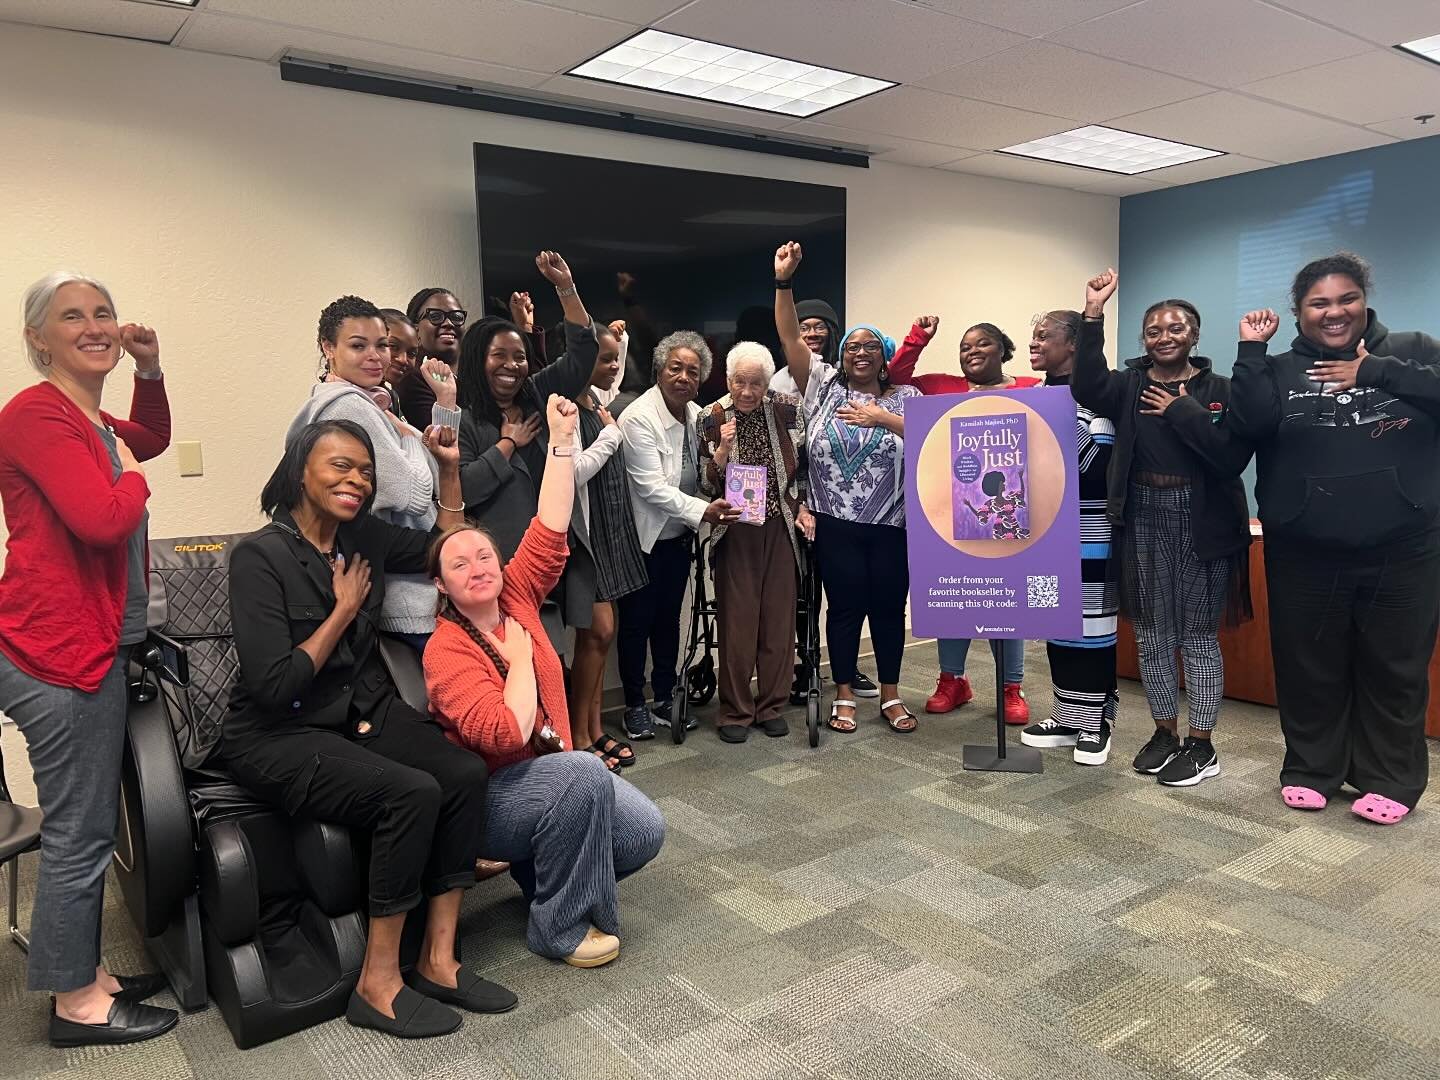 A very special thank you to the Helen Rucker Center for Black Excellence at California State University Monterey Bay for engaging dialogue on how to remain joyful as we advance justice. I was delighted to gift an inscribed copy of my book Joyfully Ju